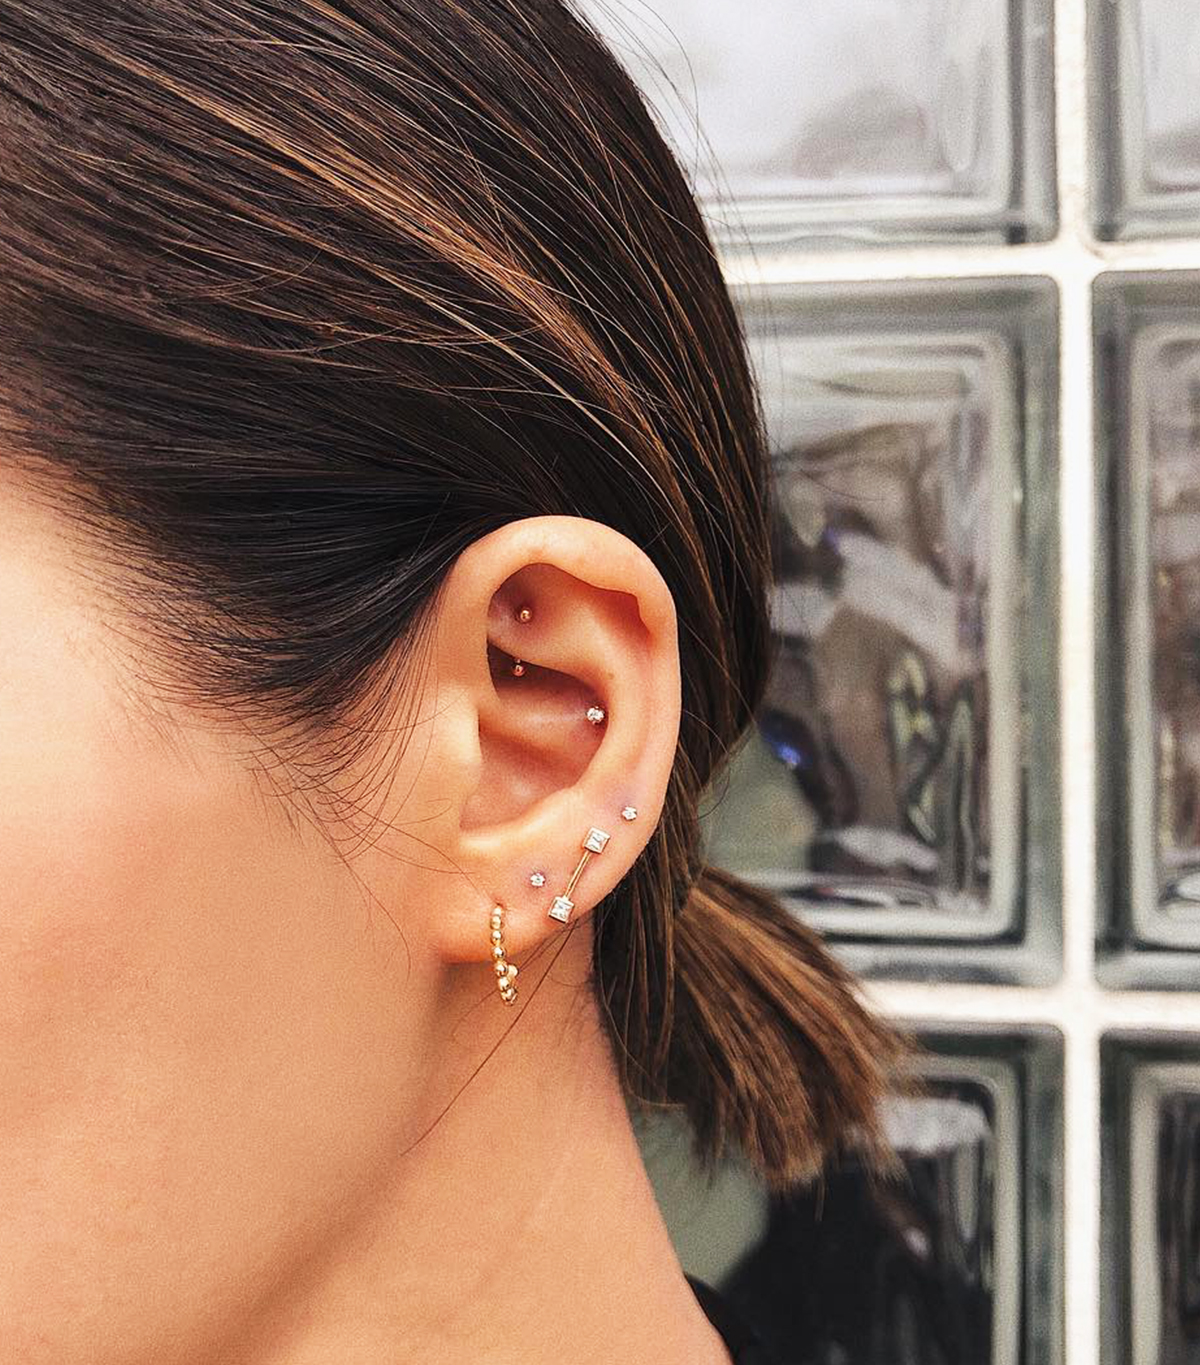 4 Ear Piercing Tips From L.A.'s Most Popular Piercer | Who What Wear